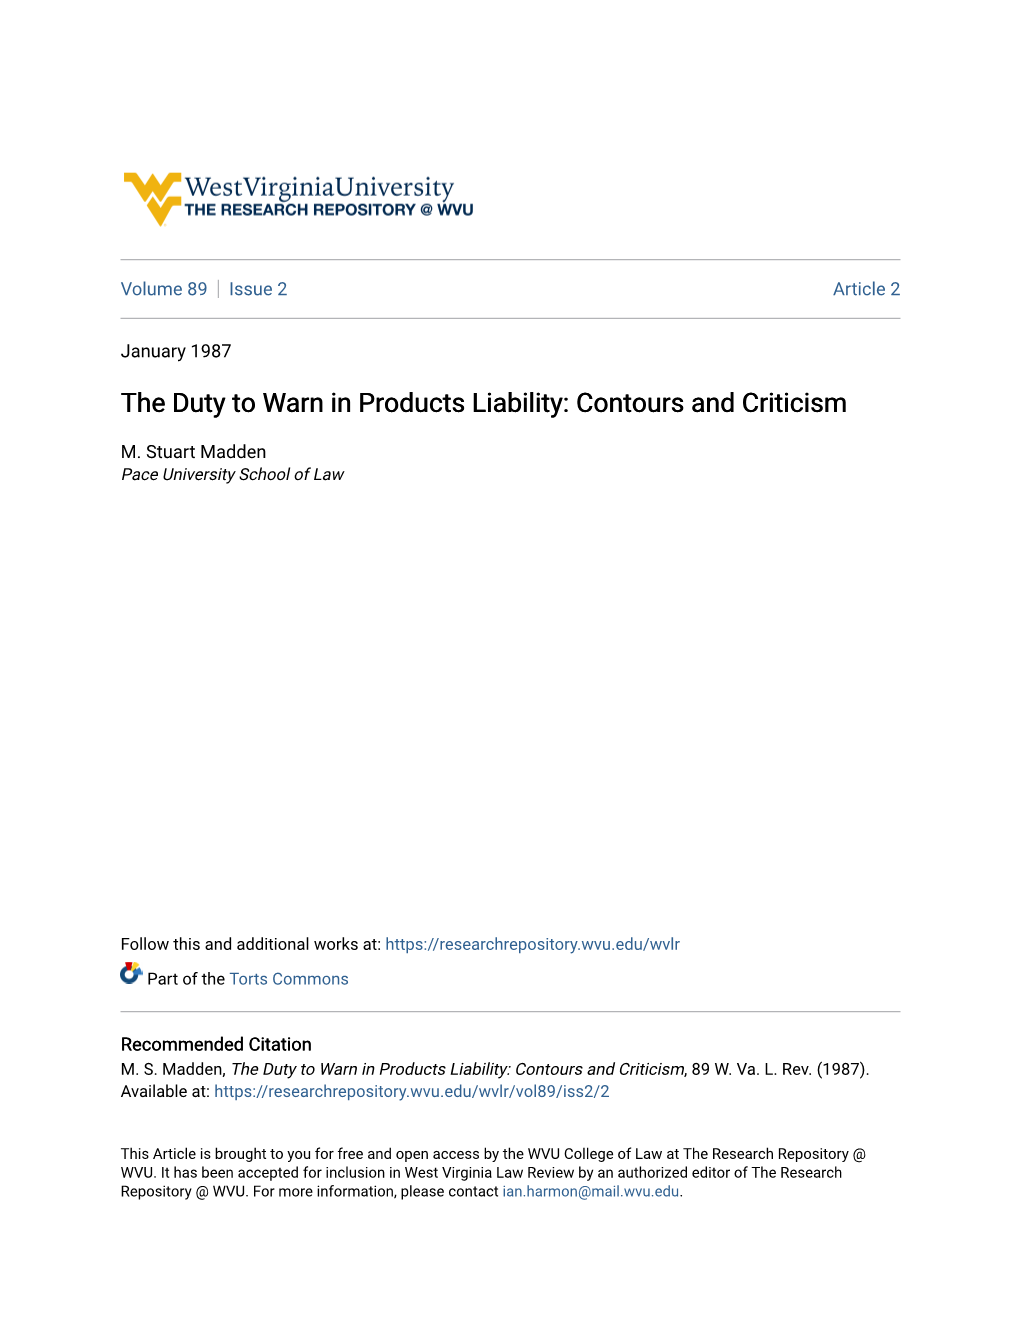 The Duty to Warn in Products Liability: Contours and Criticism